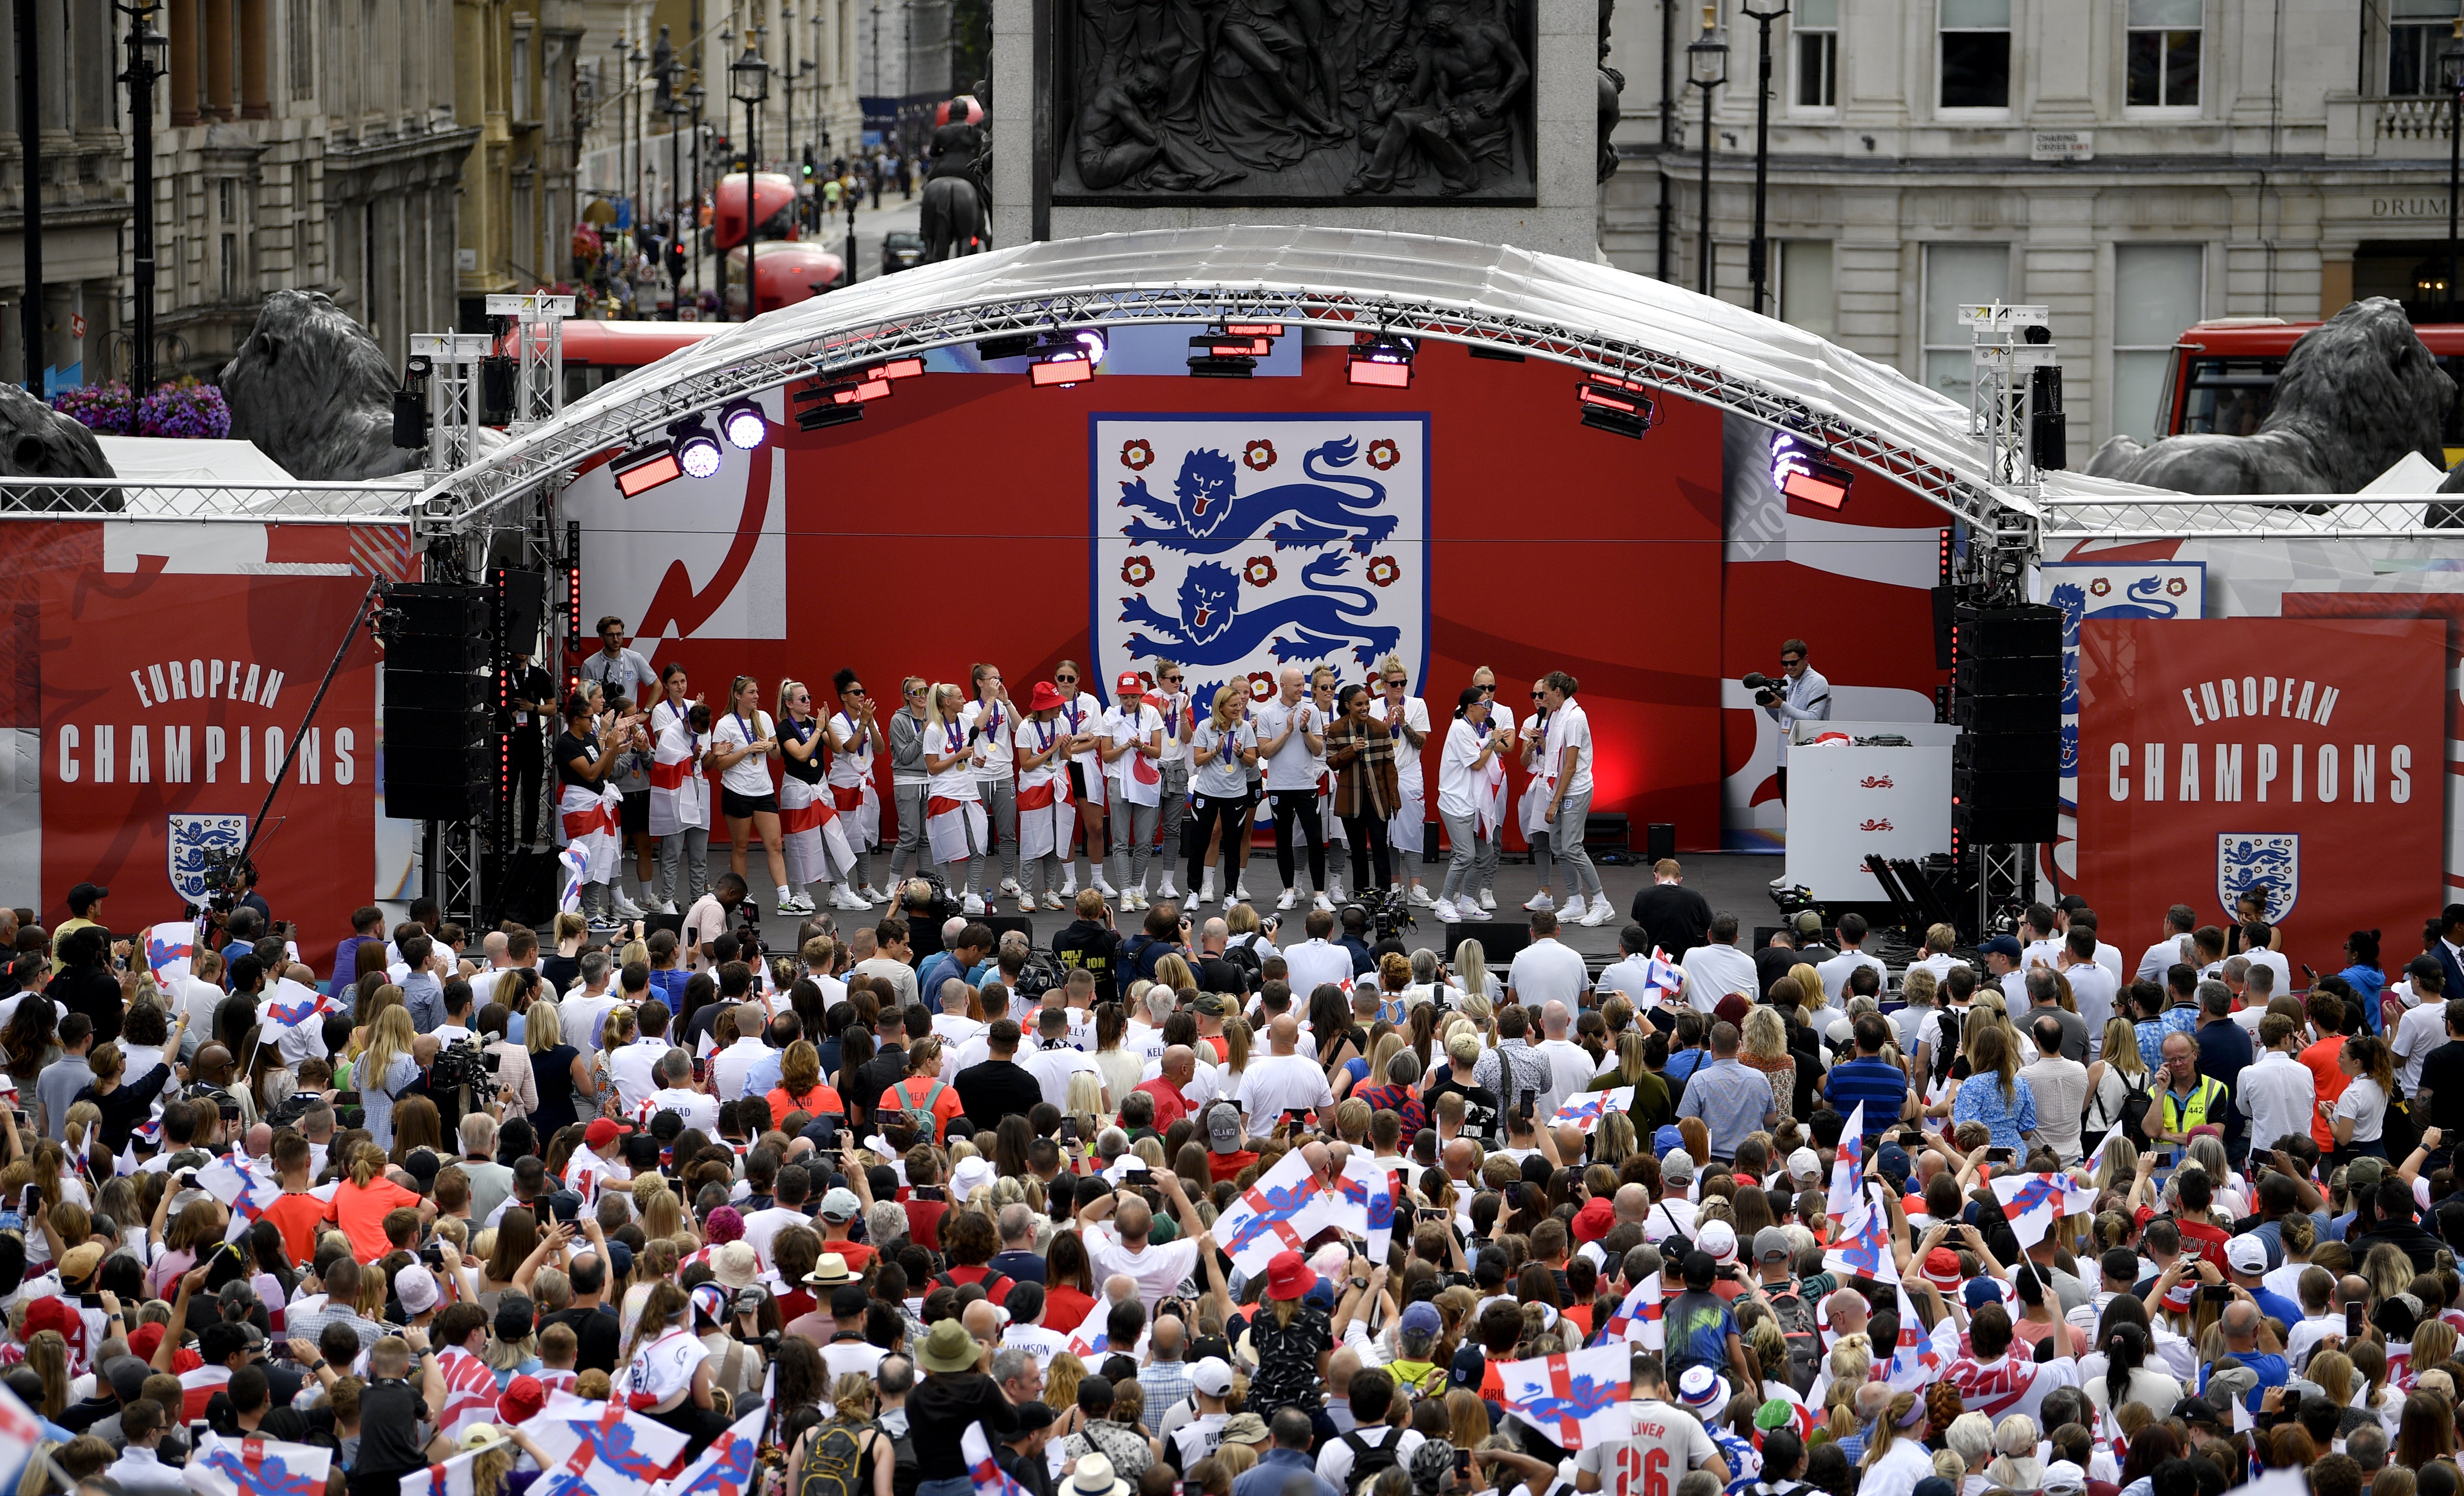 The England team on stage during a fan celebration in Trafalgar Square, London, to commemorate England’s historic Euro 2022 triumph (Beresford Hodge/PA)